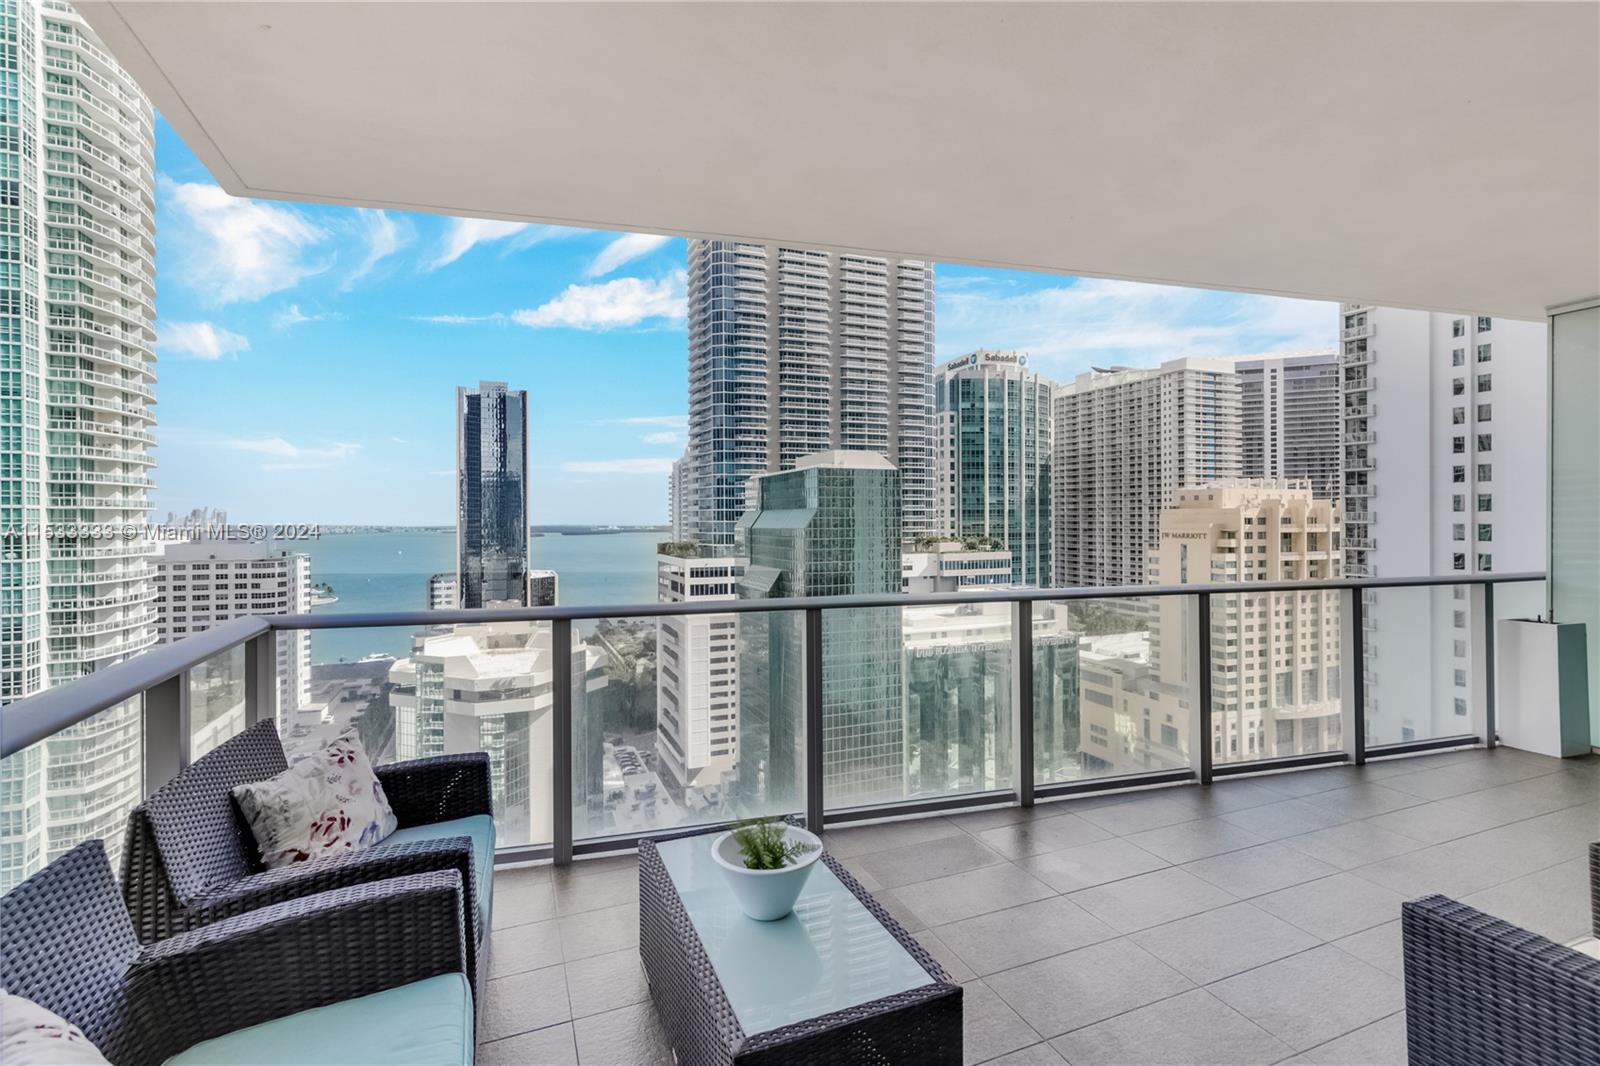 Easy to show! Resort lifestyle & the most spectacular NE BAY & BRICKELL CITY VIEWS. Fully finished corner unit perfectly located at the 22nd floor, at the most desirable line, & is being priced to sell: 3BR+DEN/3BA, private elevator, expansive balcony w/Summer Kitchen & wood tile floors. By Architects Sieger Suarez, 1010BRICKELL is the only family oriented condominium in the heart of Brickell, offering phenomenal common areas: Outdoor Running Track, Squash Court, indoor & outdoor swimming pool, kids gym, Game Room, Bowling Lanes, Arcades Games, Playground & Private Social Room for Adults w/Virtual golf simulator +State-of-the-art fitness center, Business Ctr & Spa. ROOF TOP TERRACE w/Swimming Pool, Glass Jacuzzi, Endless Pool to swim against, Outdoor movie theater,BBQ grills